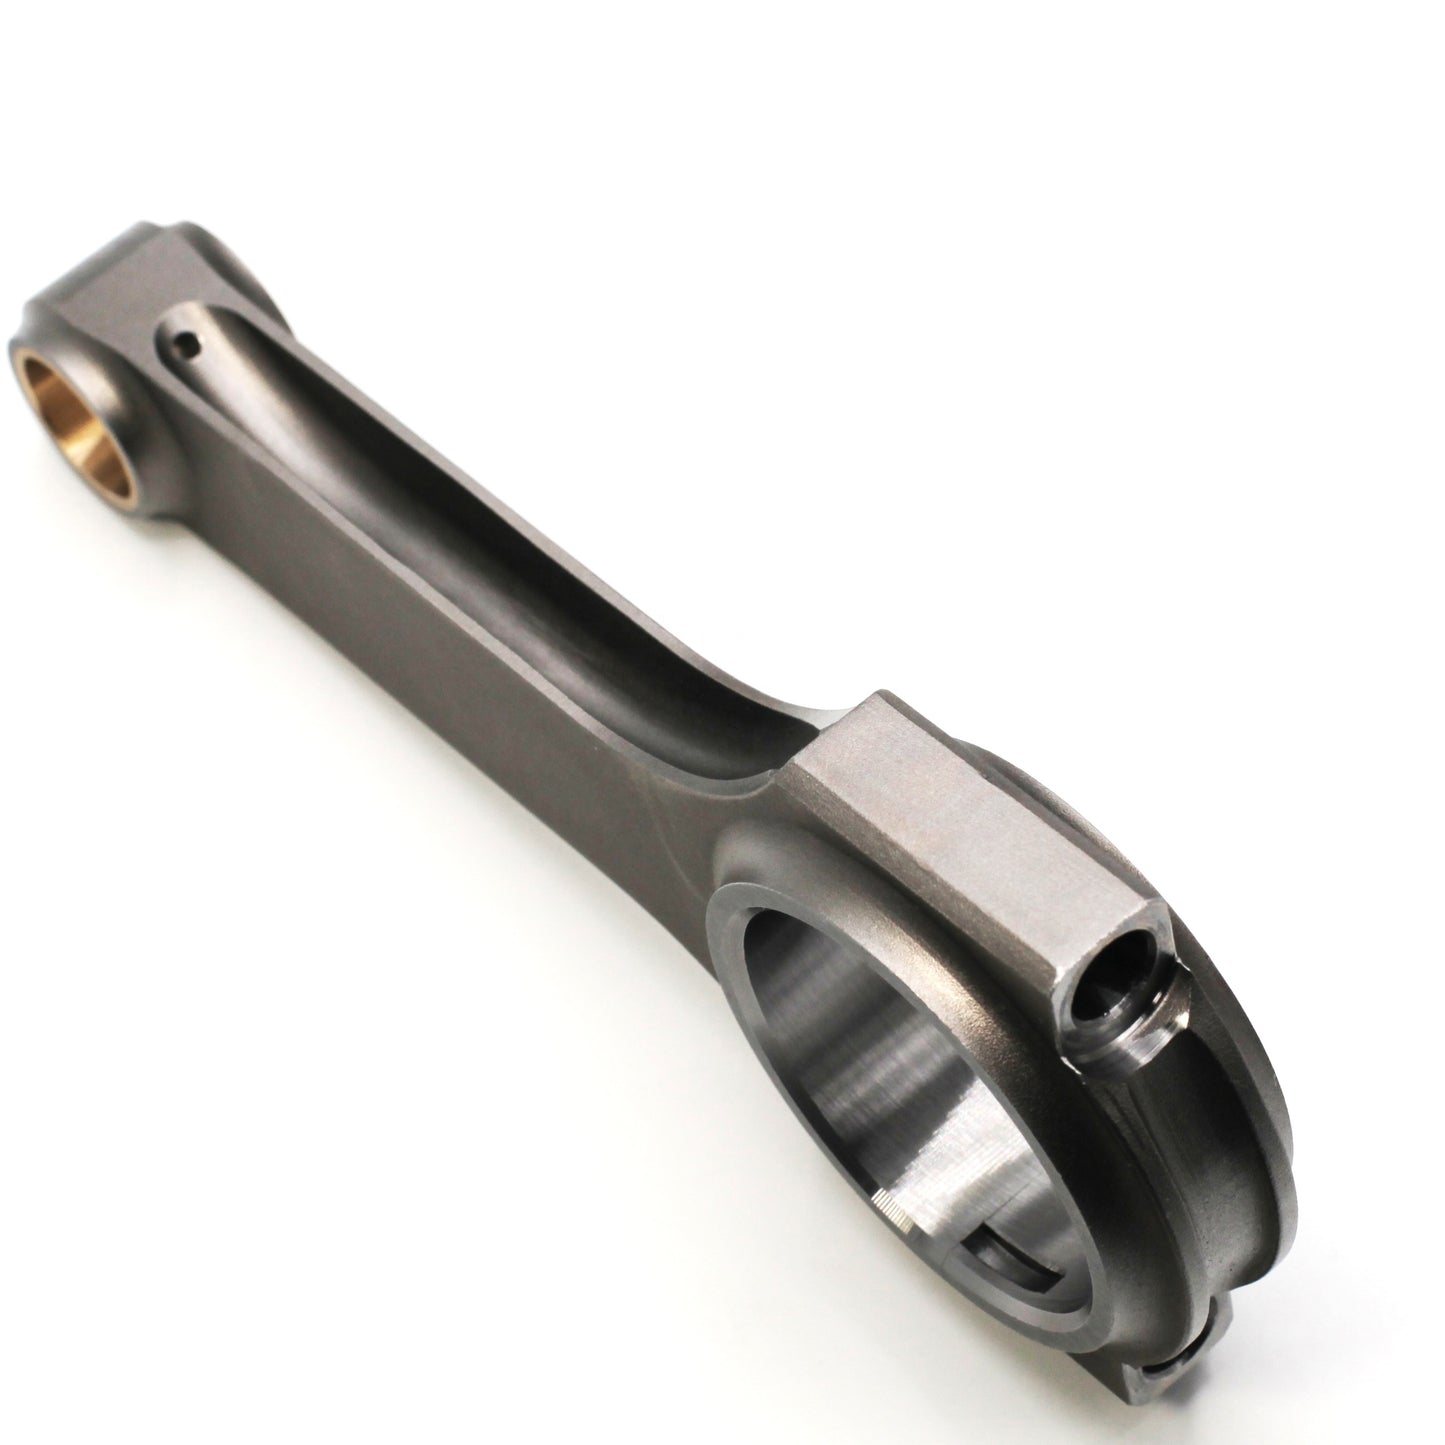 Connecting rod for Honda J25A